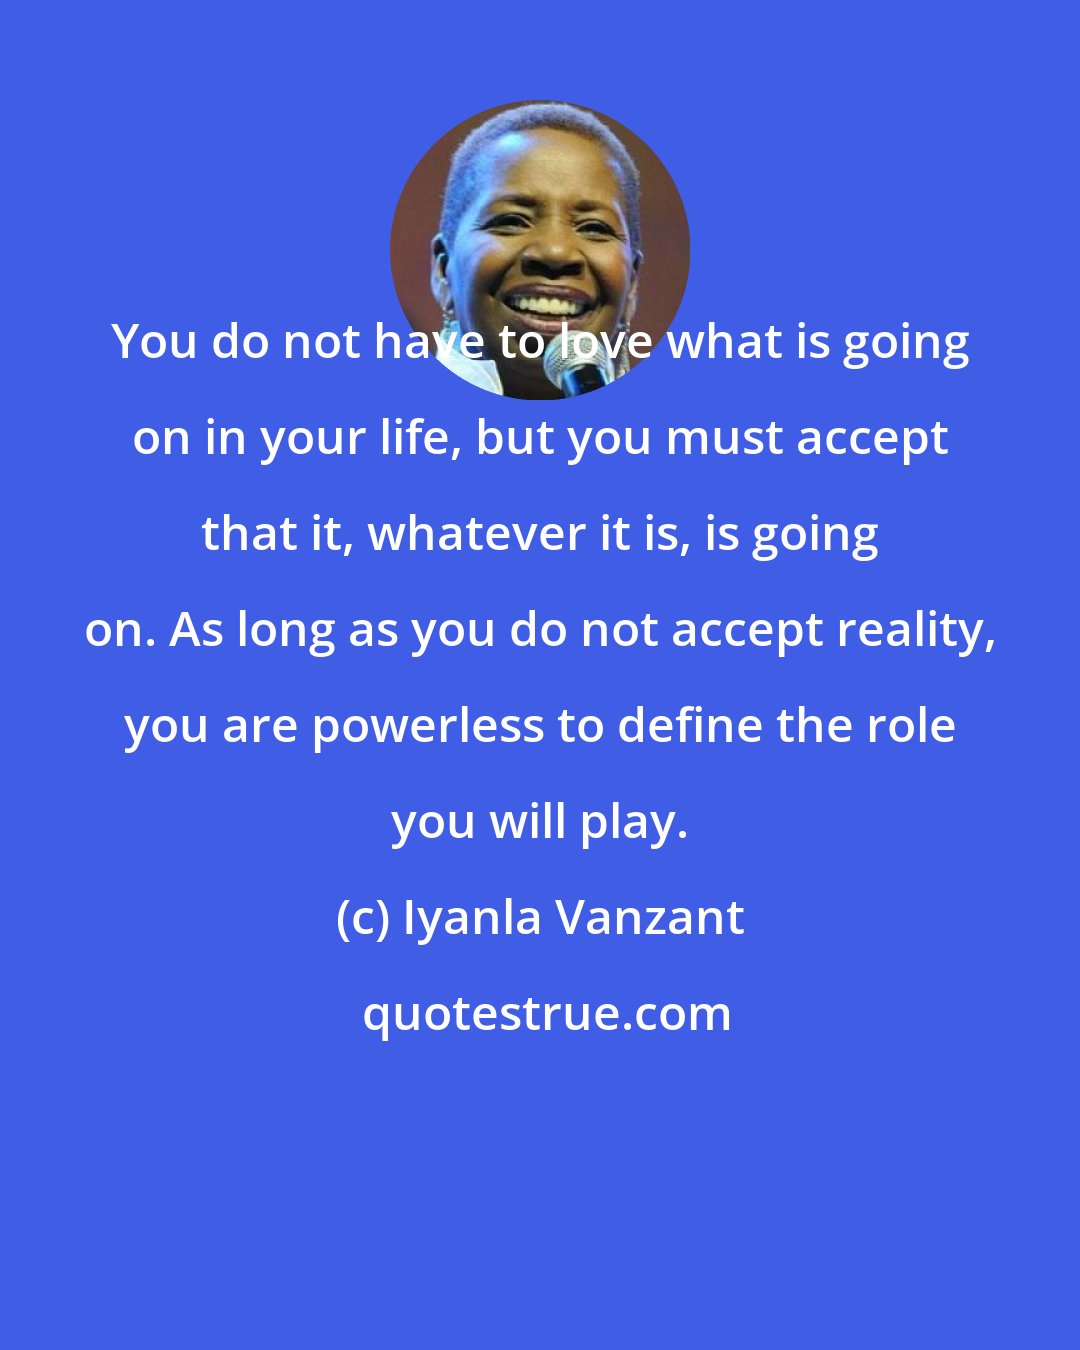 Iyanla Vanzant: You do not have to love what is going on in your life, but you must accept that it, whatever it is, is going on. As long as you do not accept reality, you are powerless to define the role you will play.